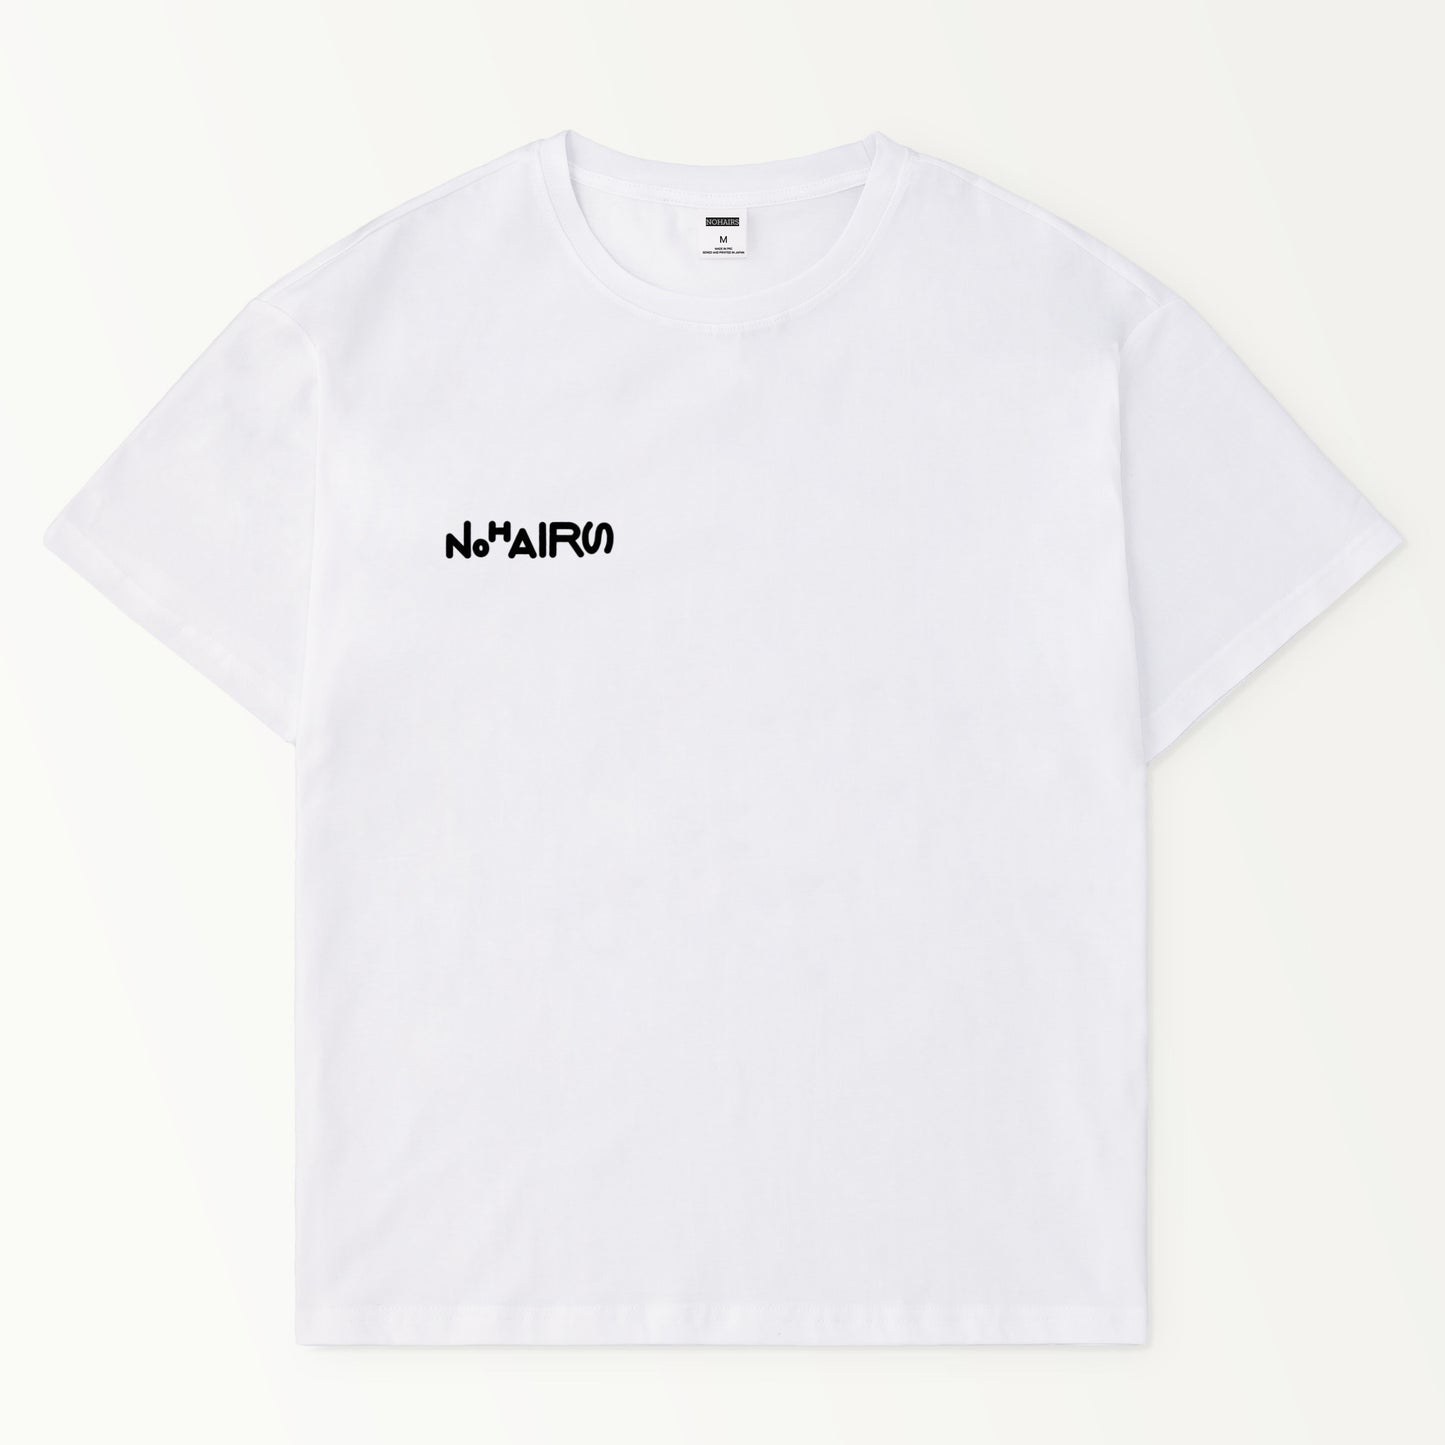 SWAG Tee back ver.